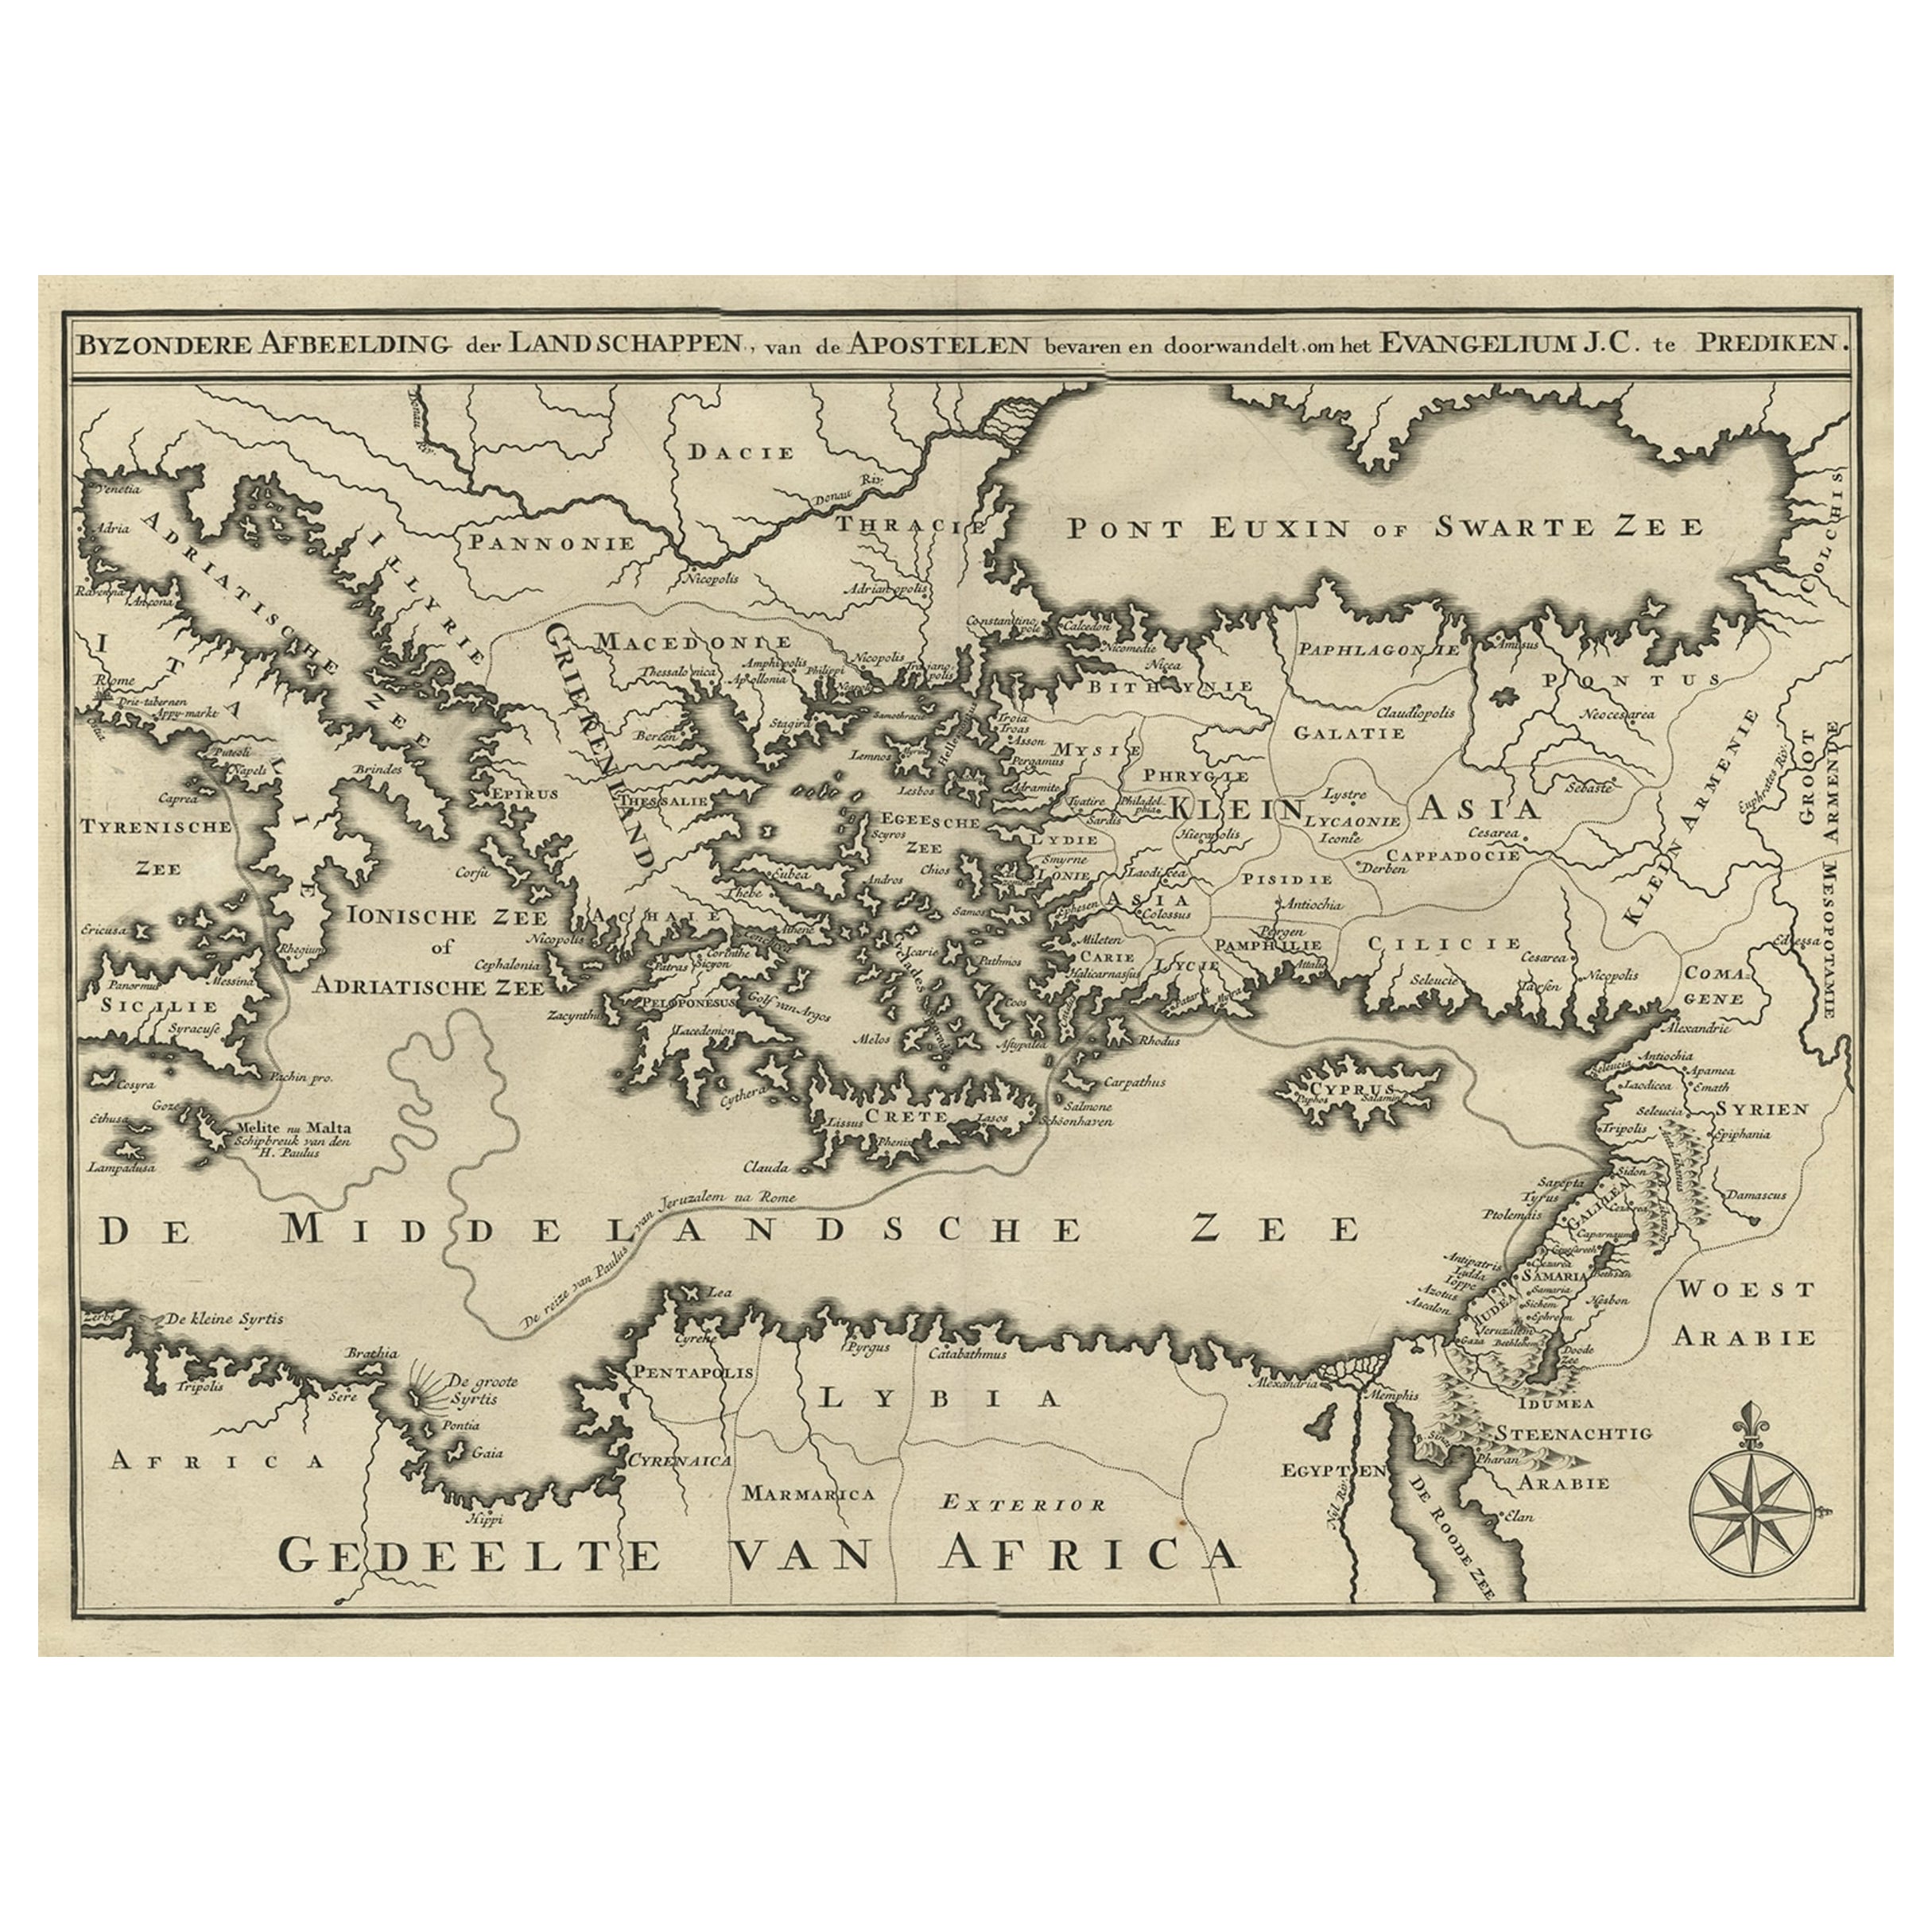 Scarce Map of the Mediterranean and Parts of Europe, Africa & Middle East, 1725